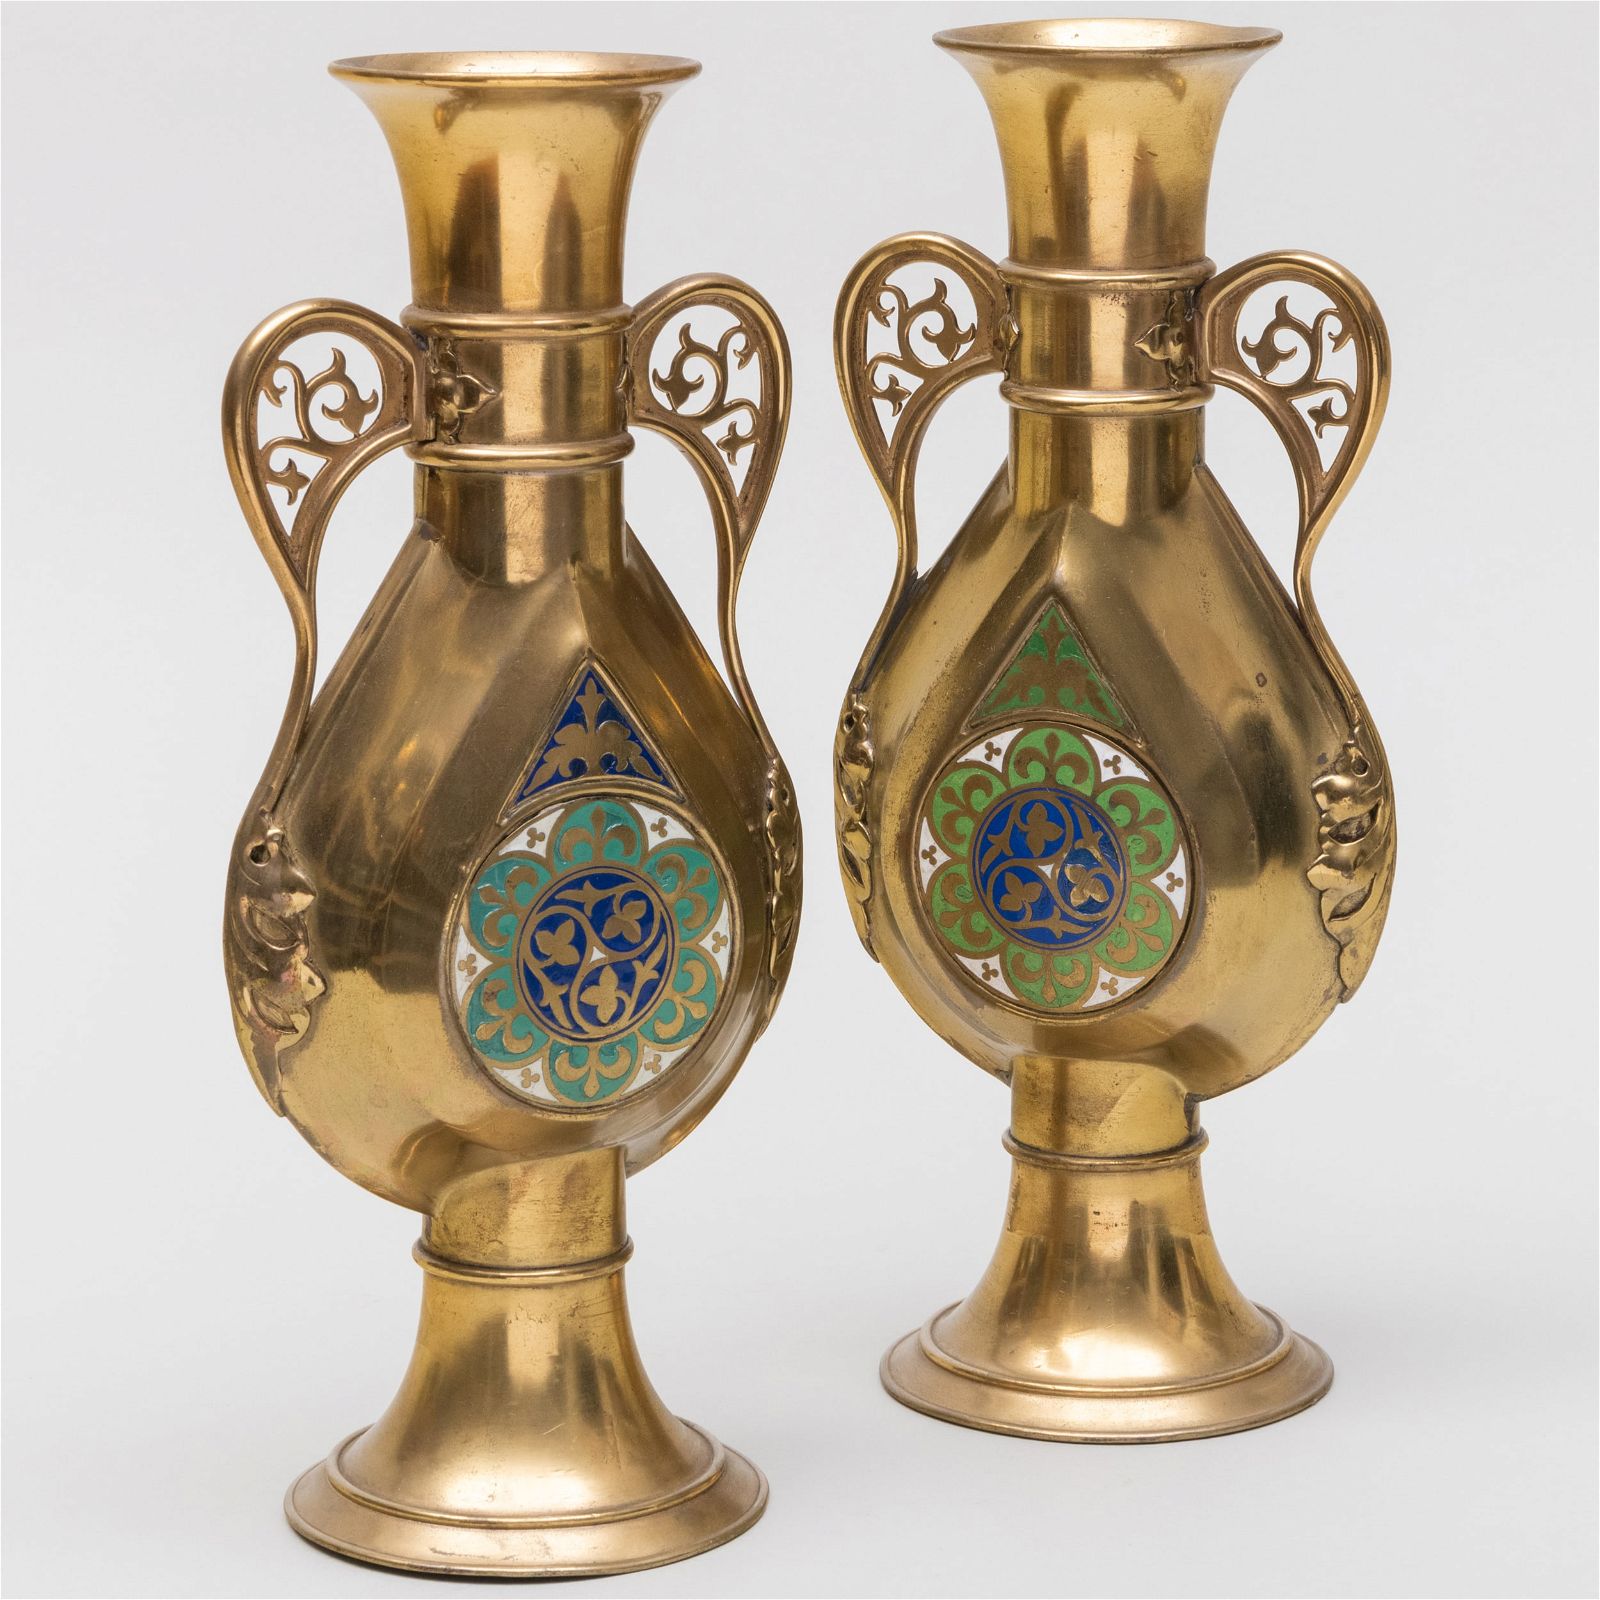 Pair of AWN Pugin for John Hardman & Co. enameled brass vases, which sold for $7,040 at Stair Galleries.